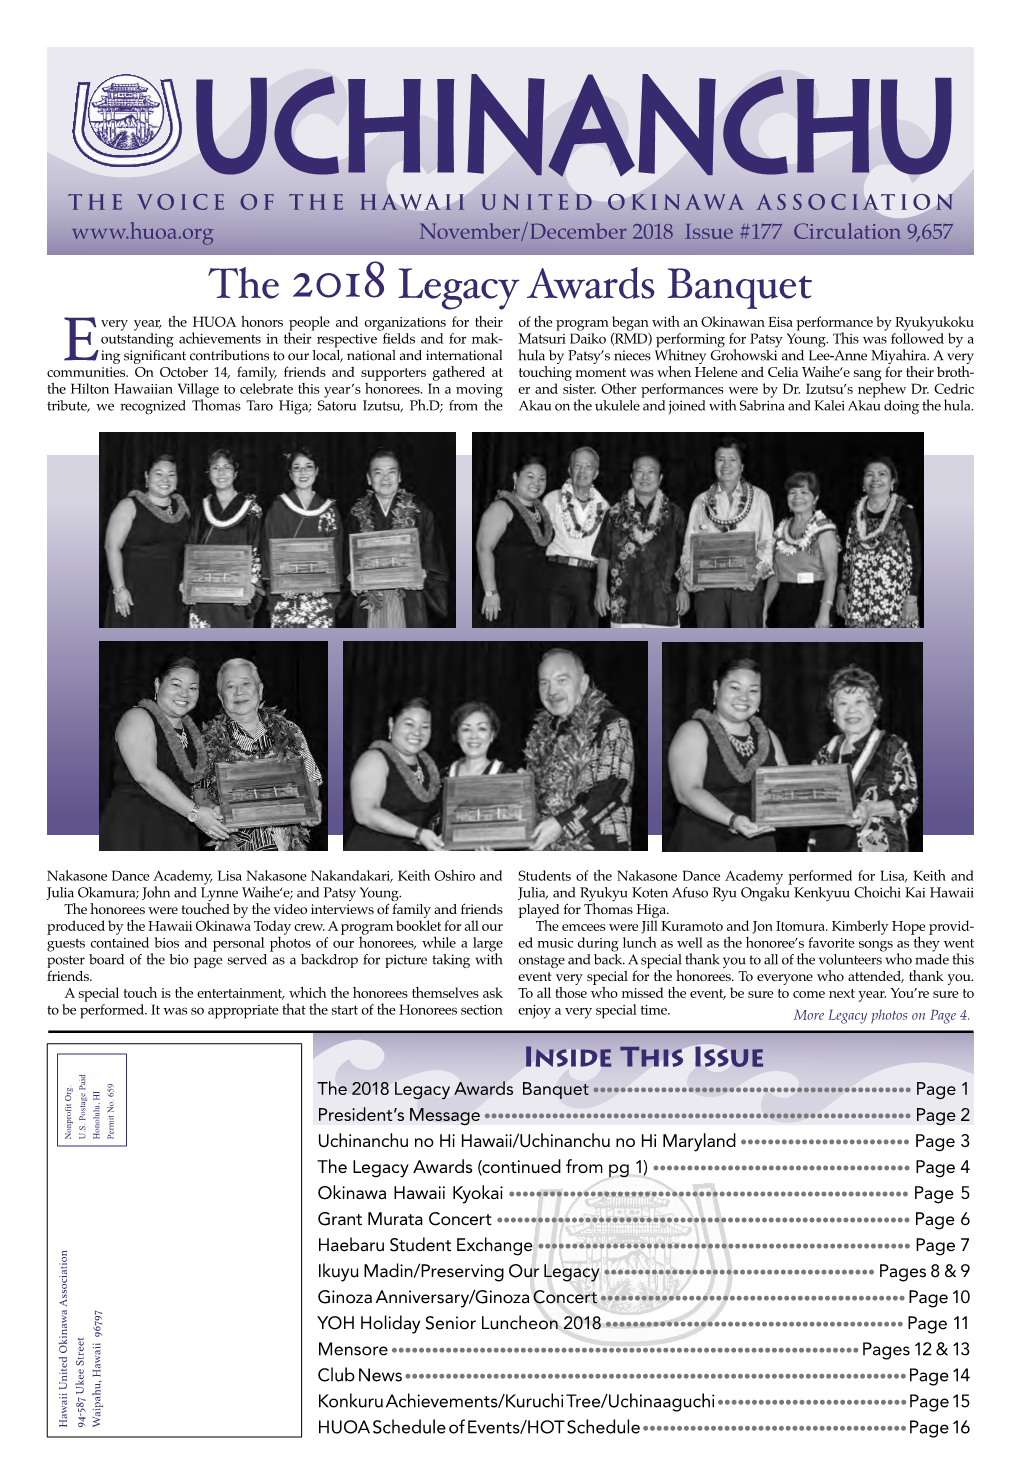 The 2018 Legacy Awards Banquet